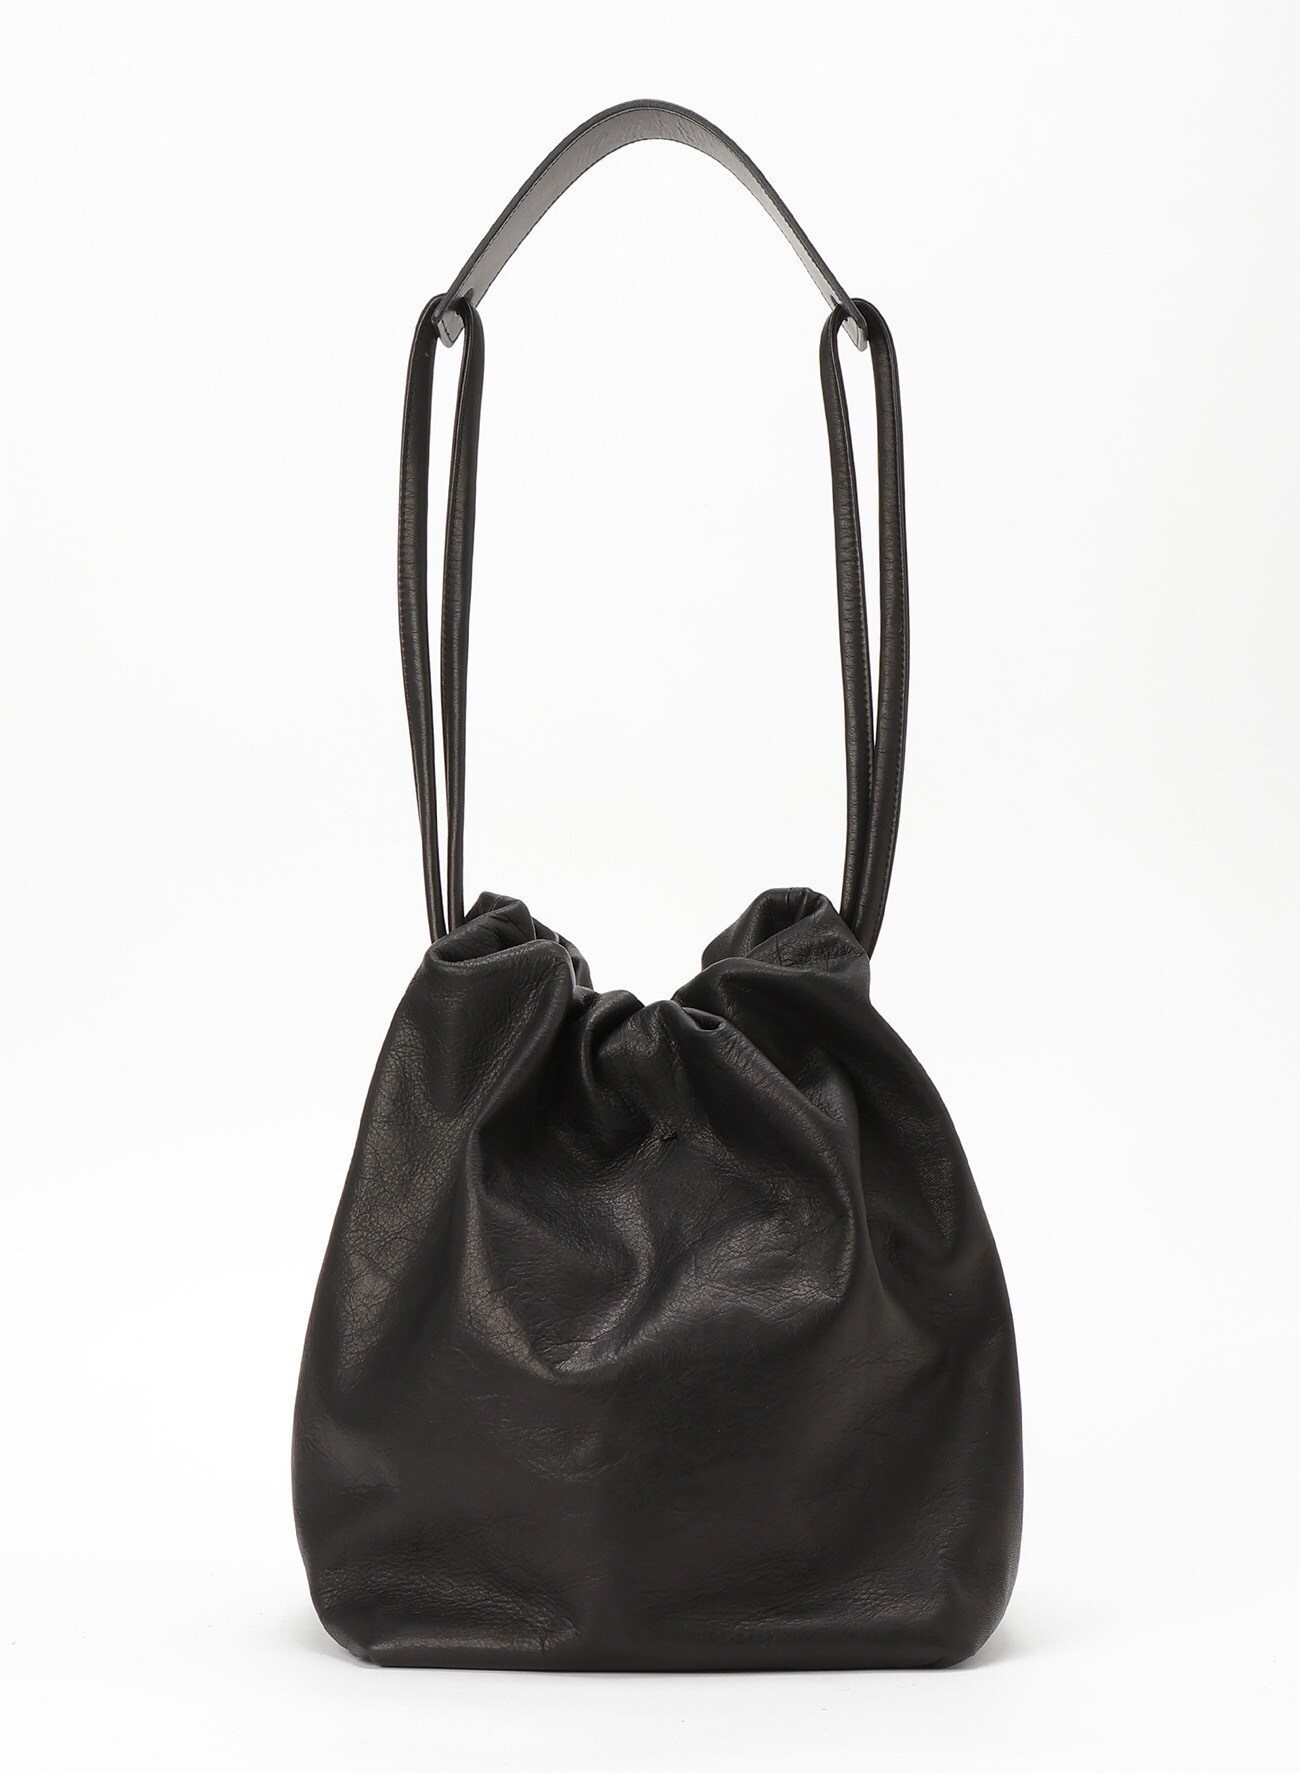 SOFT SMOOTH LEATHER SQUARE DRAWSTRING BAG